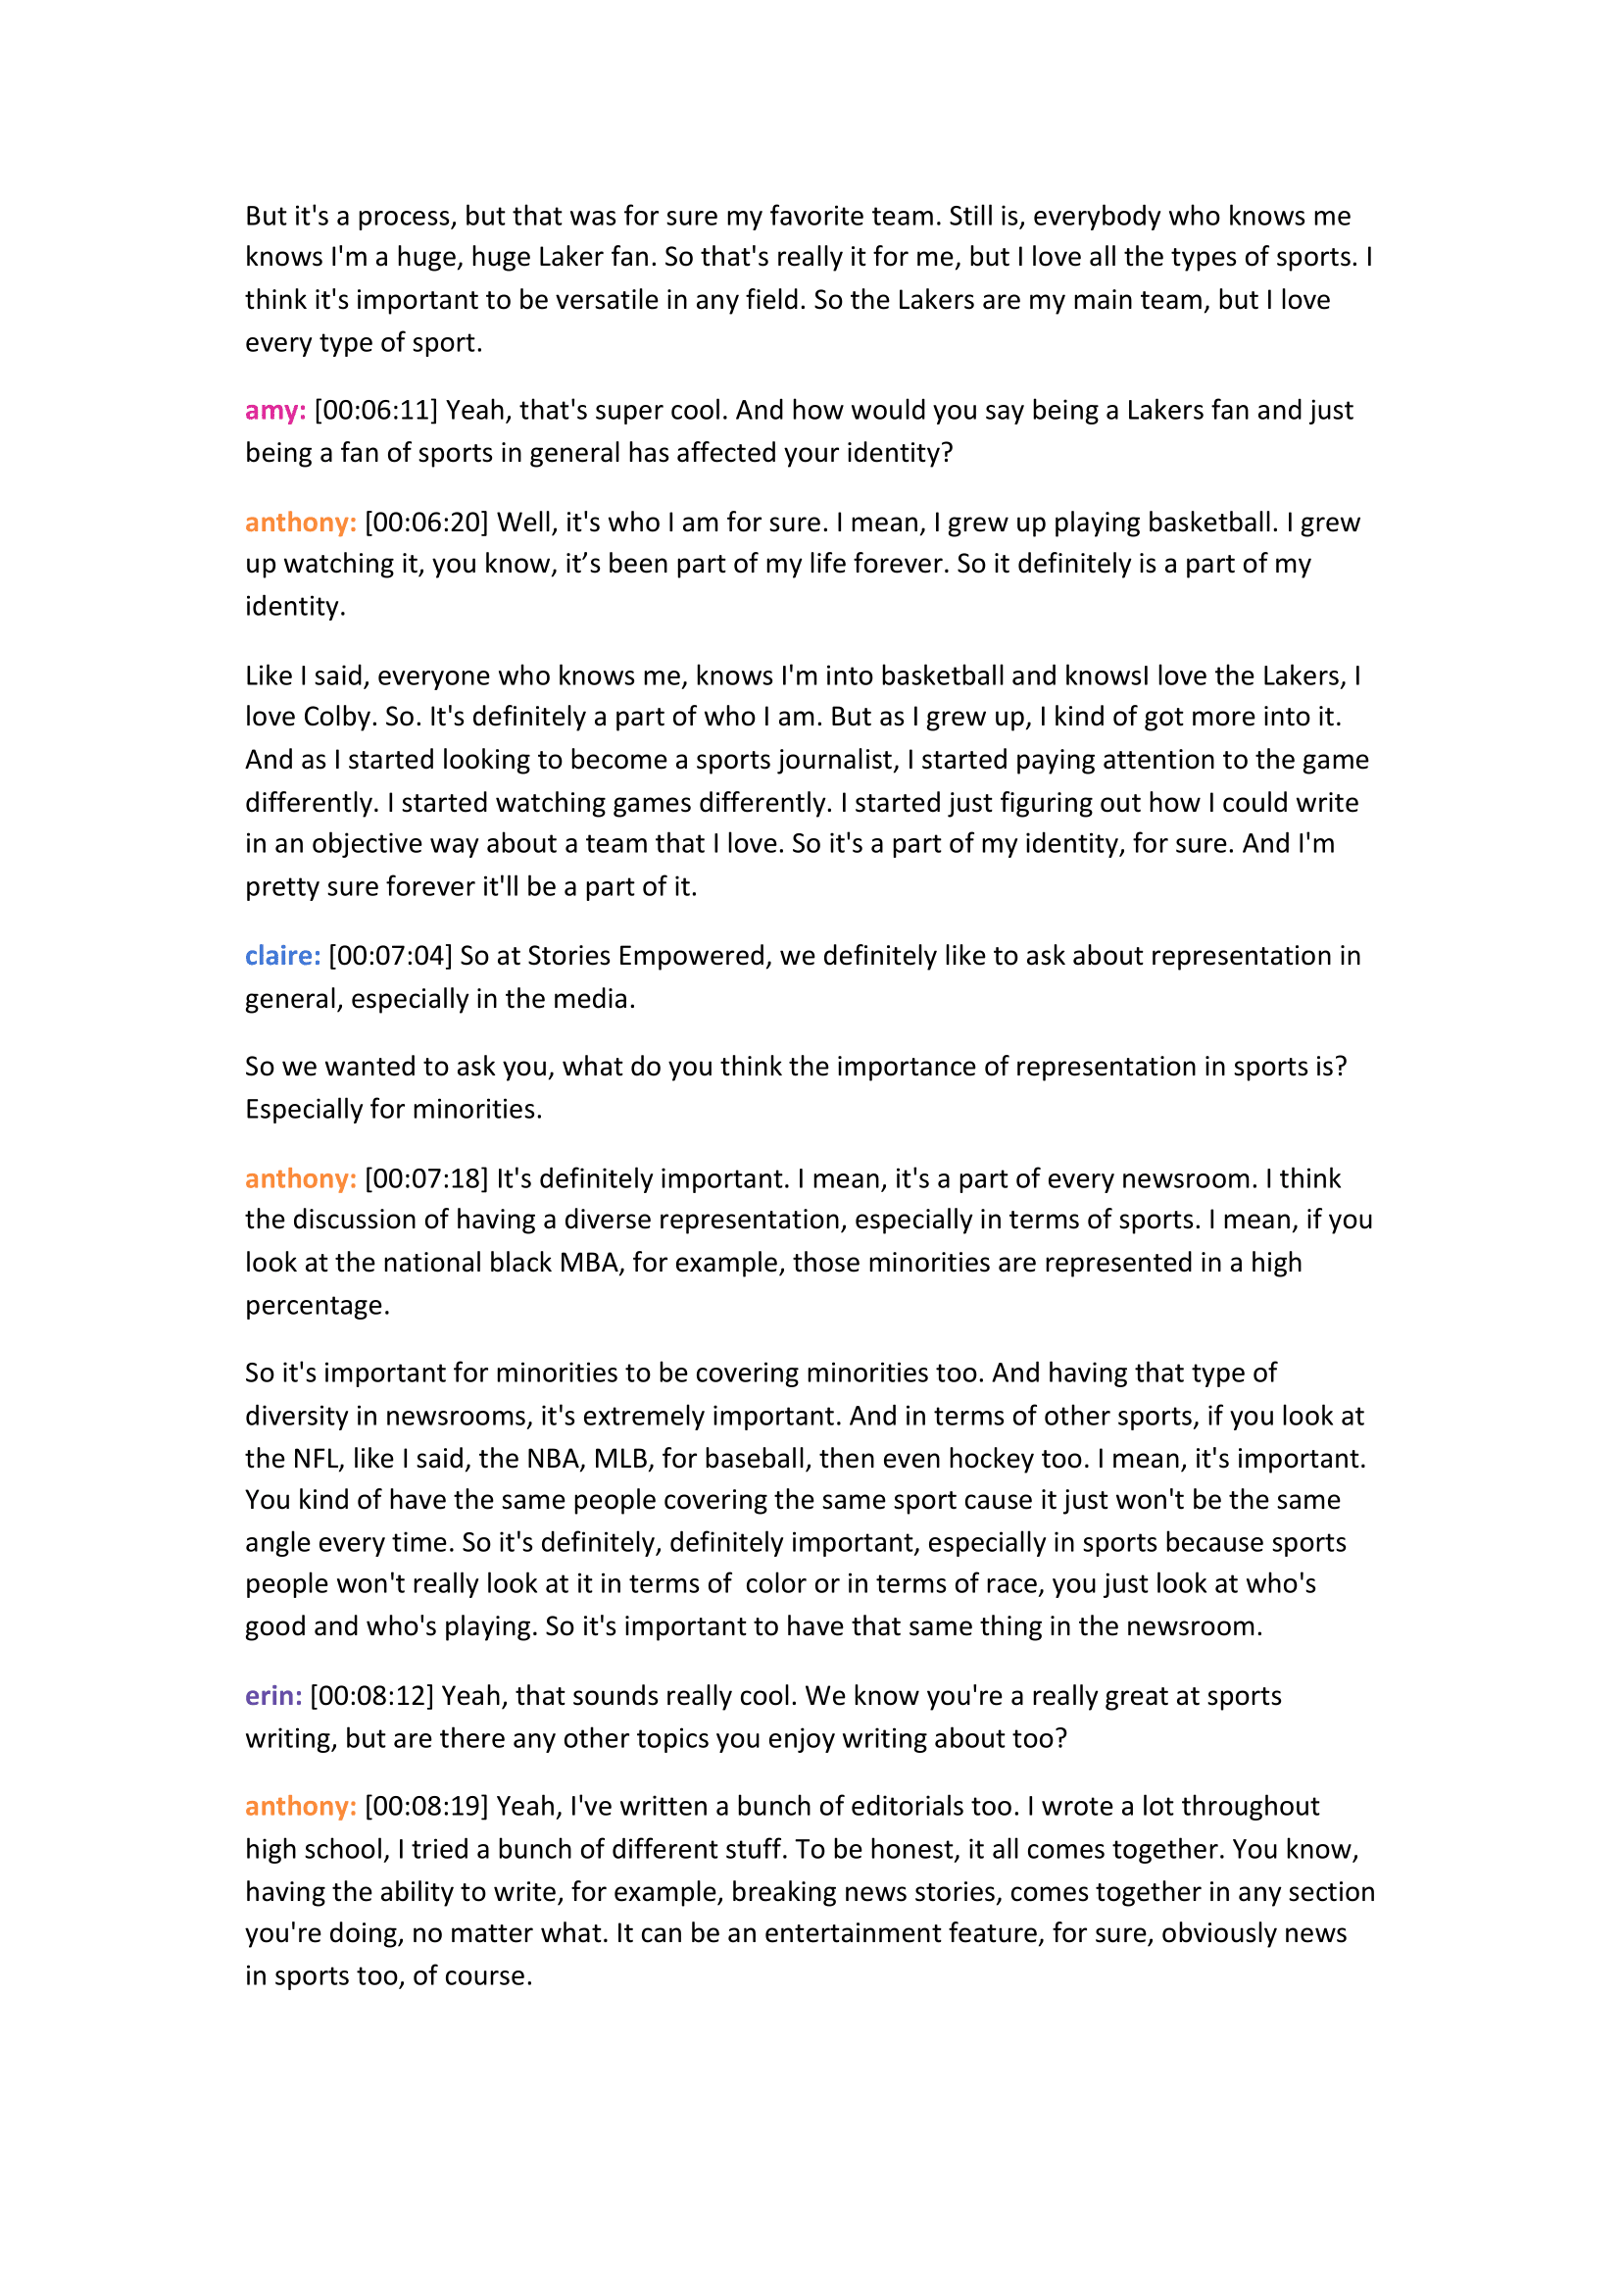 Uplift All Voices Ep 10 Transcript-3.png